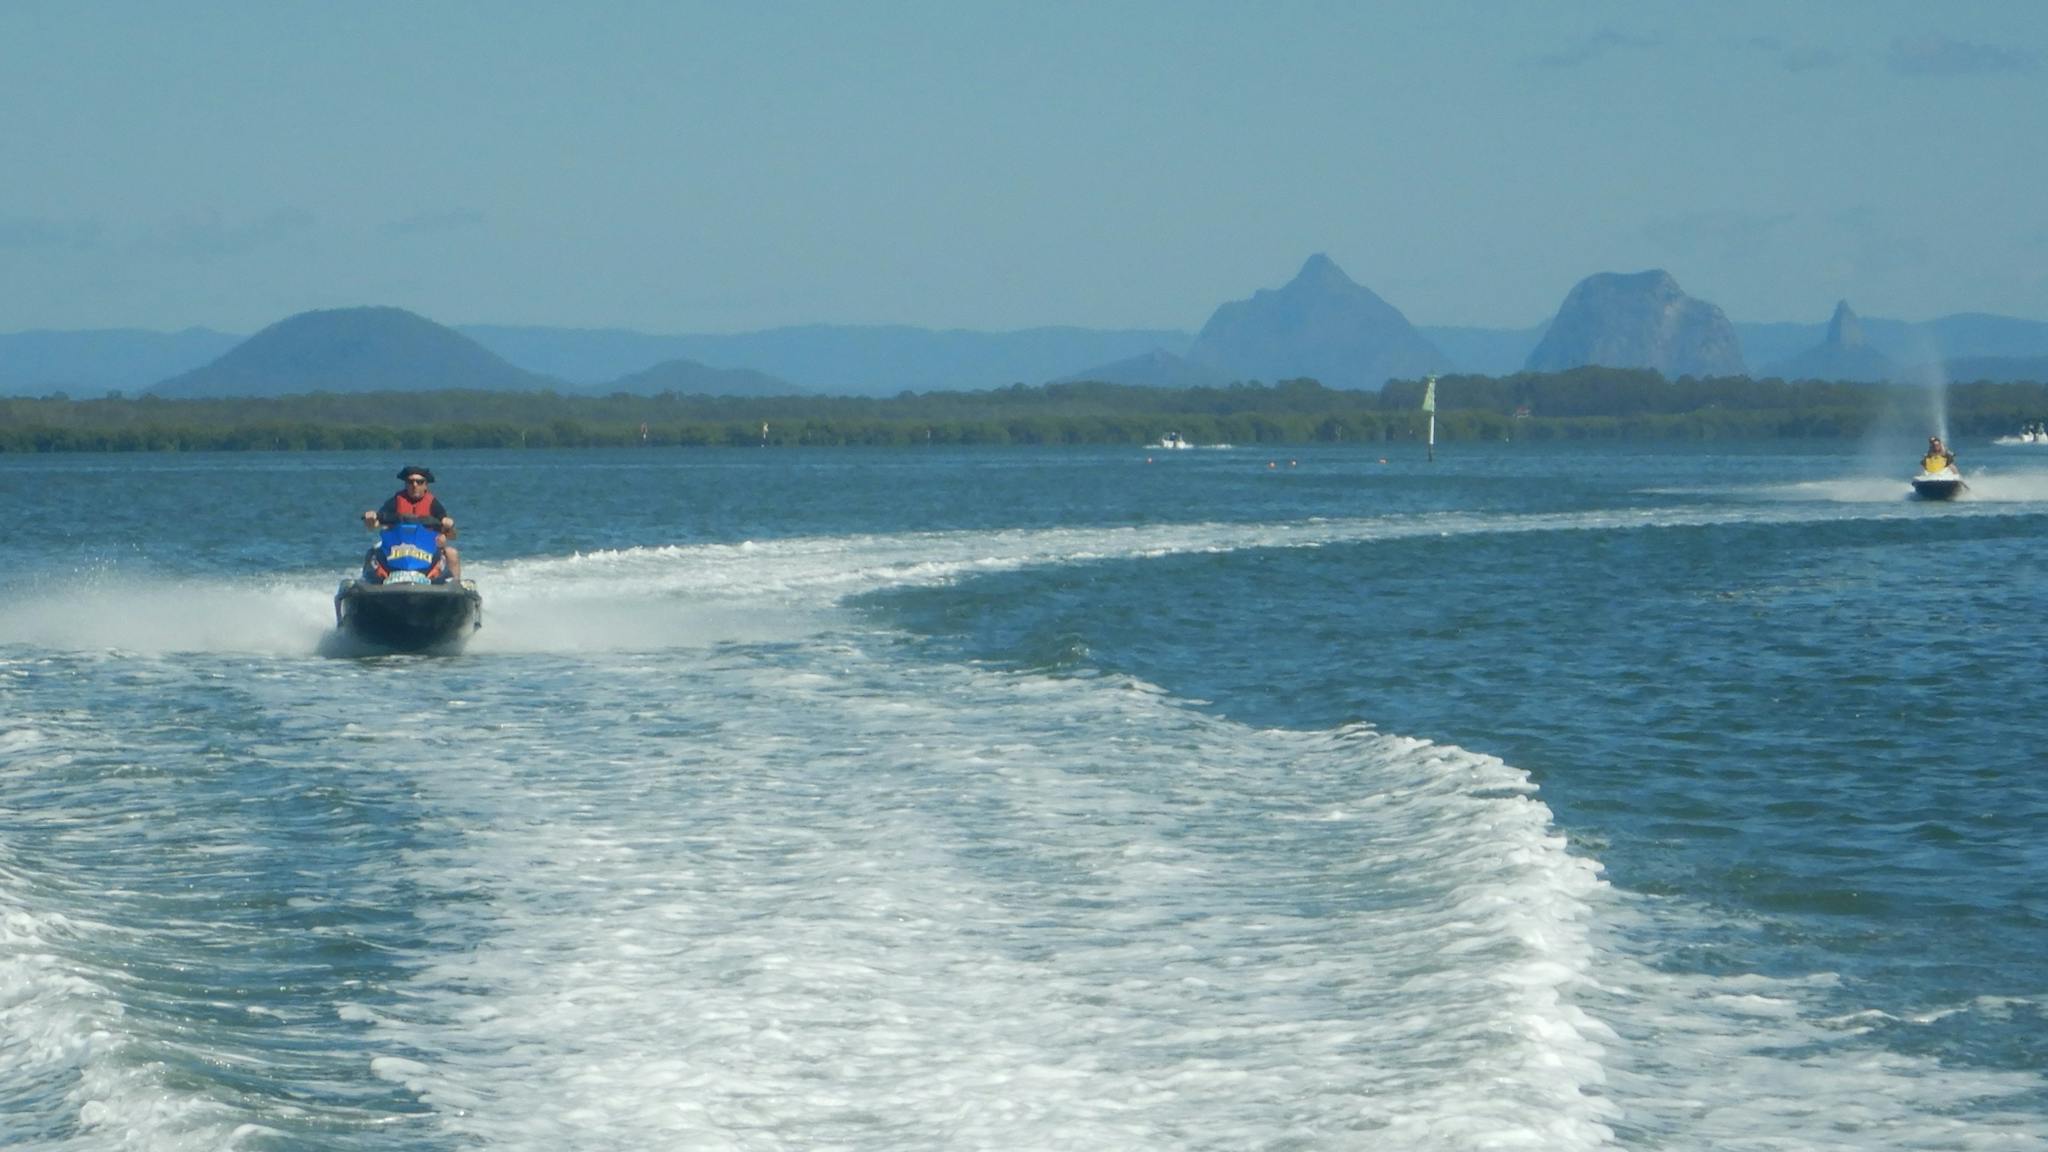 Dominating Pumicestone Passage are the volcanic Glasshouse Mountains